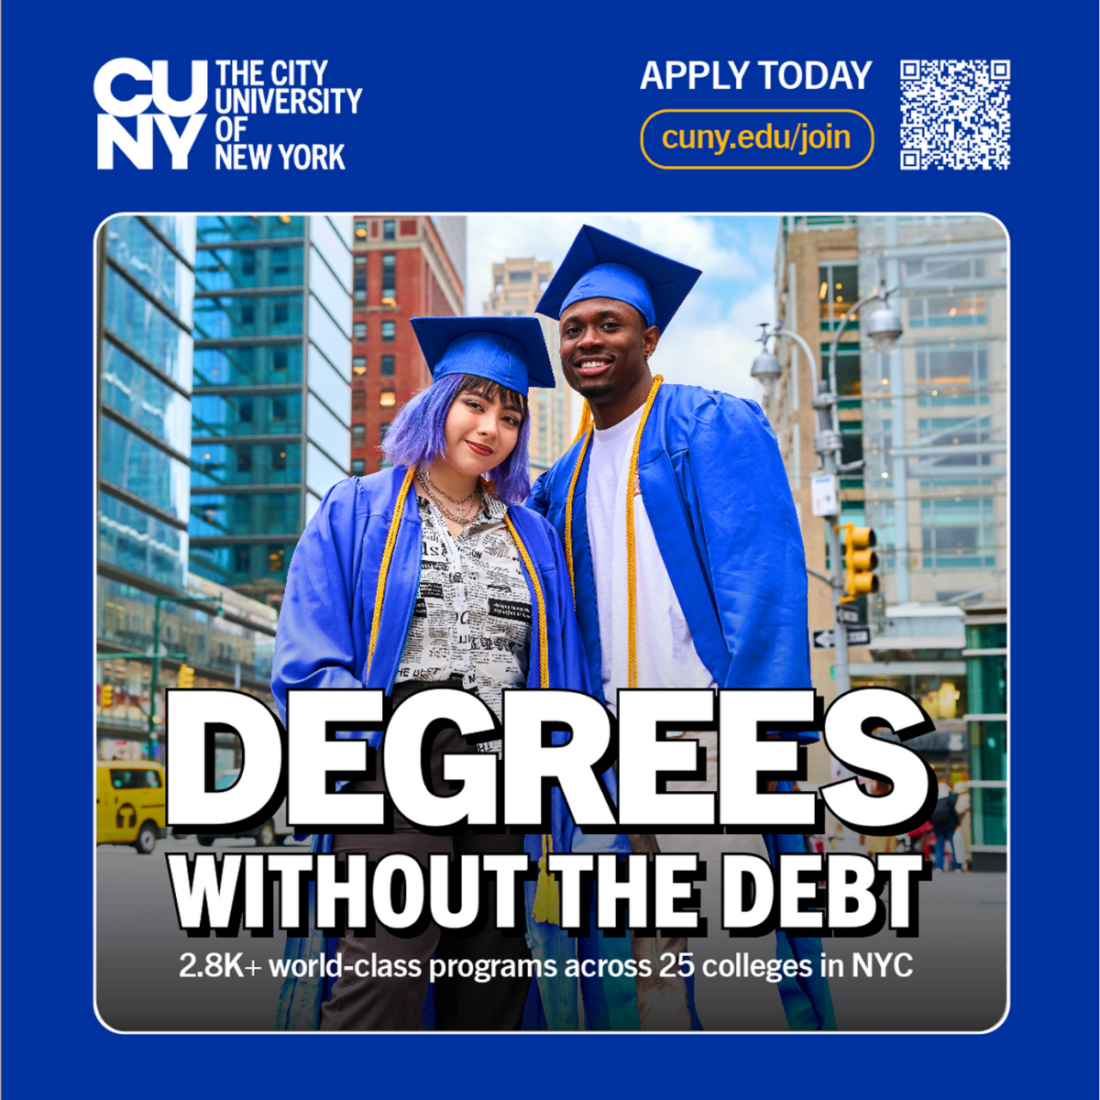 A female-presenting Asian student and a male-presenting African American student wear blue caps and gowns and stand in front of a series of tall buildings. The text at the top says "CUNY The City University of New York Apply Now." Below, it says, "Degrees without the debt: 2.8K+ world-class programs across 25 colleges in NYC"